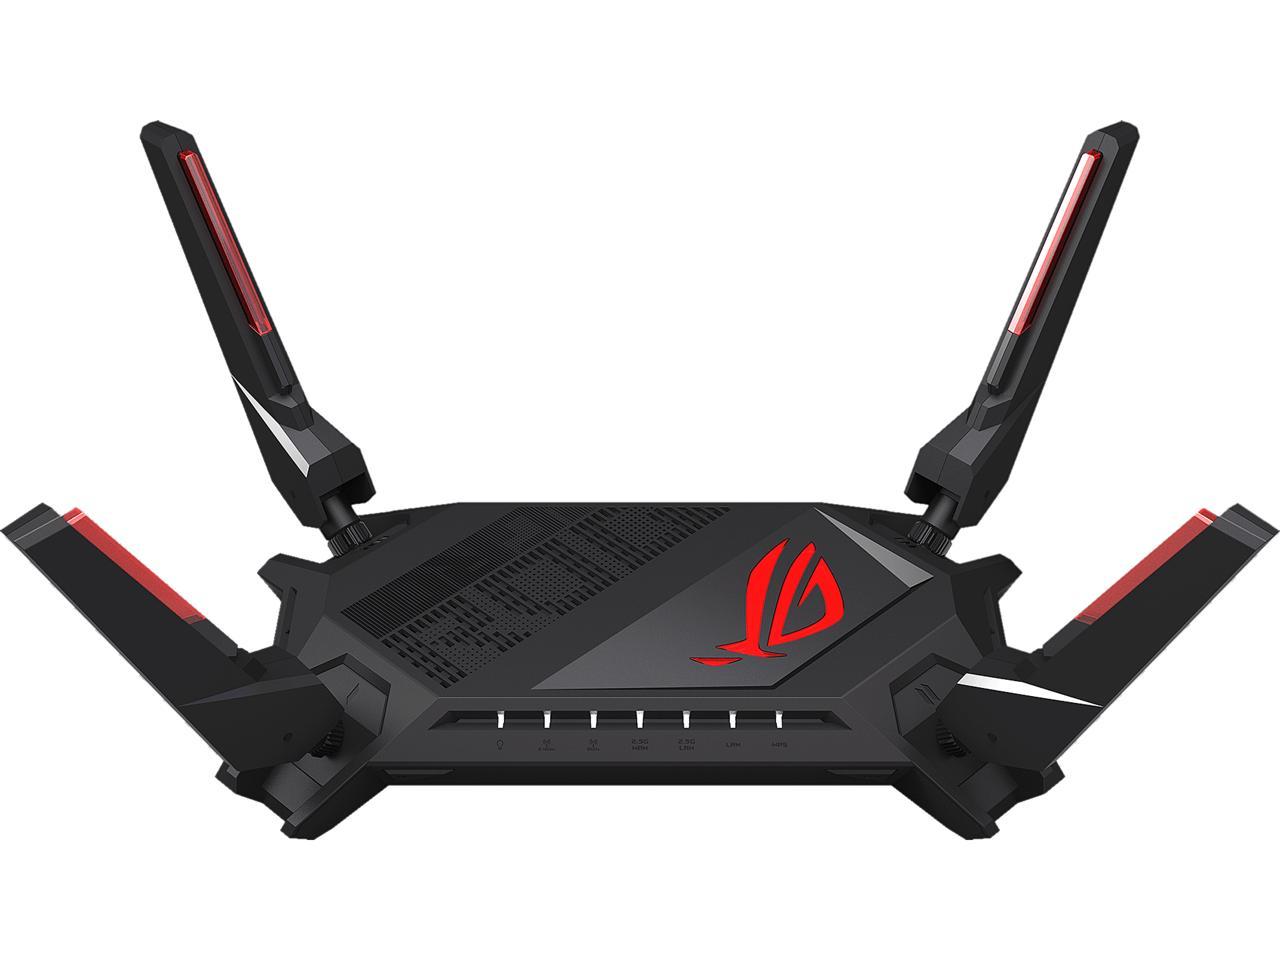 ASUS ROG Rapture GT-AX6000 Dual-Band WiFi 6 (802.11ax) Gaming Router, Dual 2.5G ports, enhanced hardware, WAN aggregation, VPN Fusion, Triple-Level Game Acceleration, free network security and AiMesh support